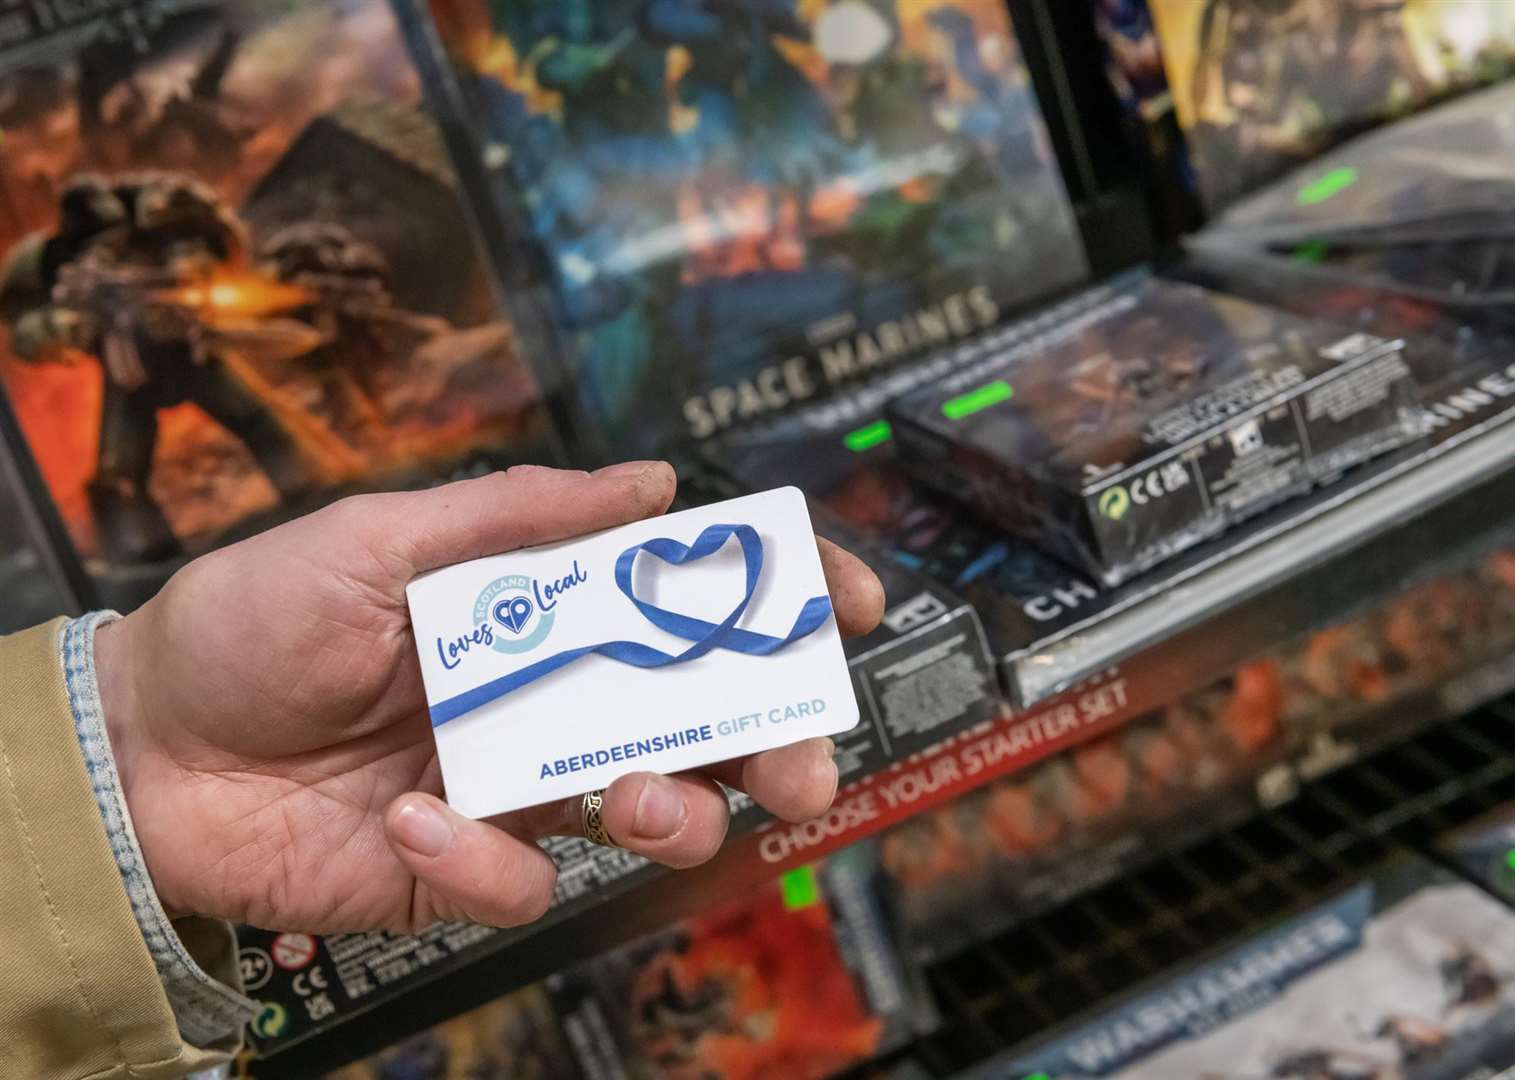 The Loves Local Card could be a boost for local business owners.